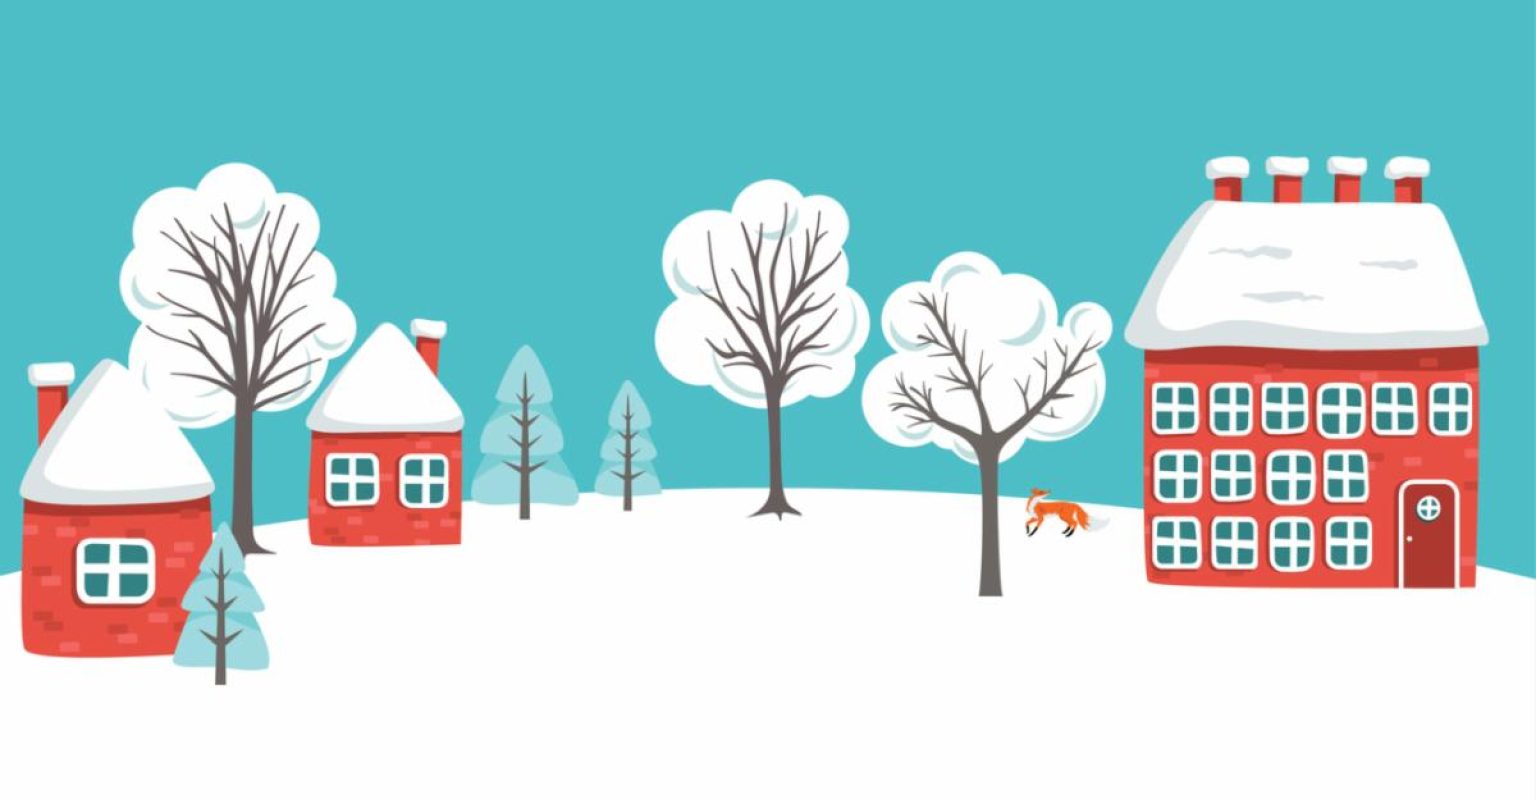 Cartoon image of winter scene - snow on ground and three red houses with trees